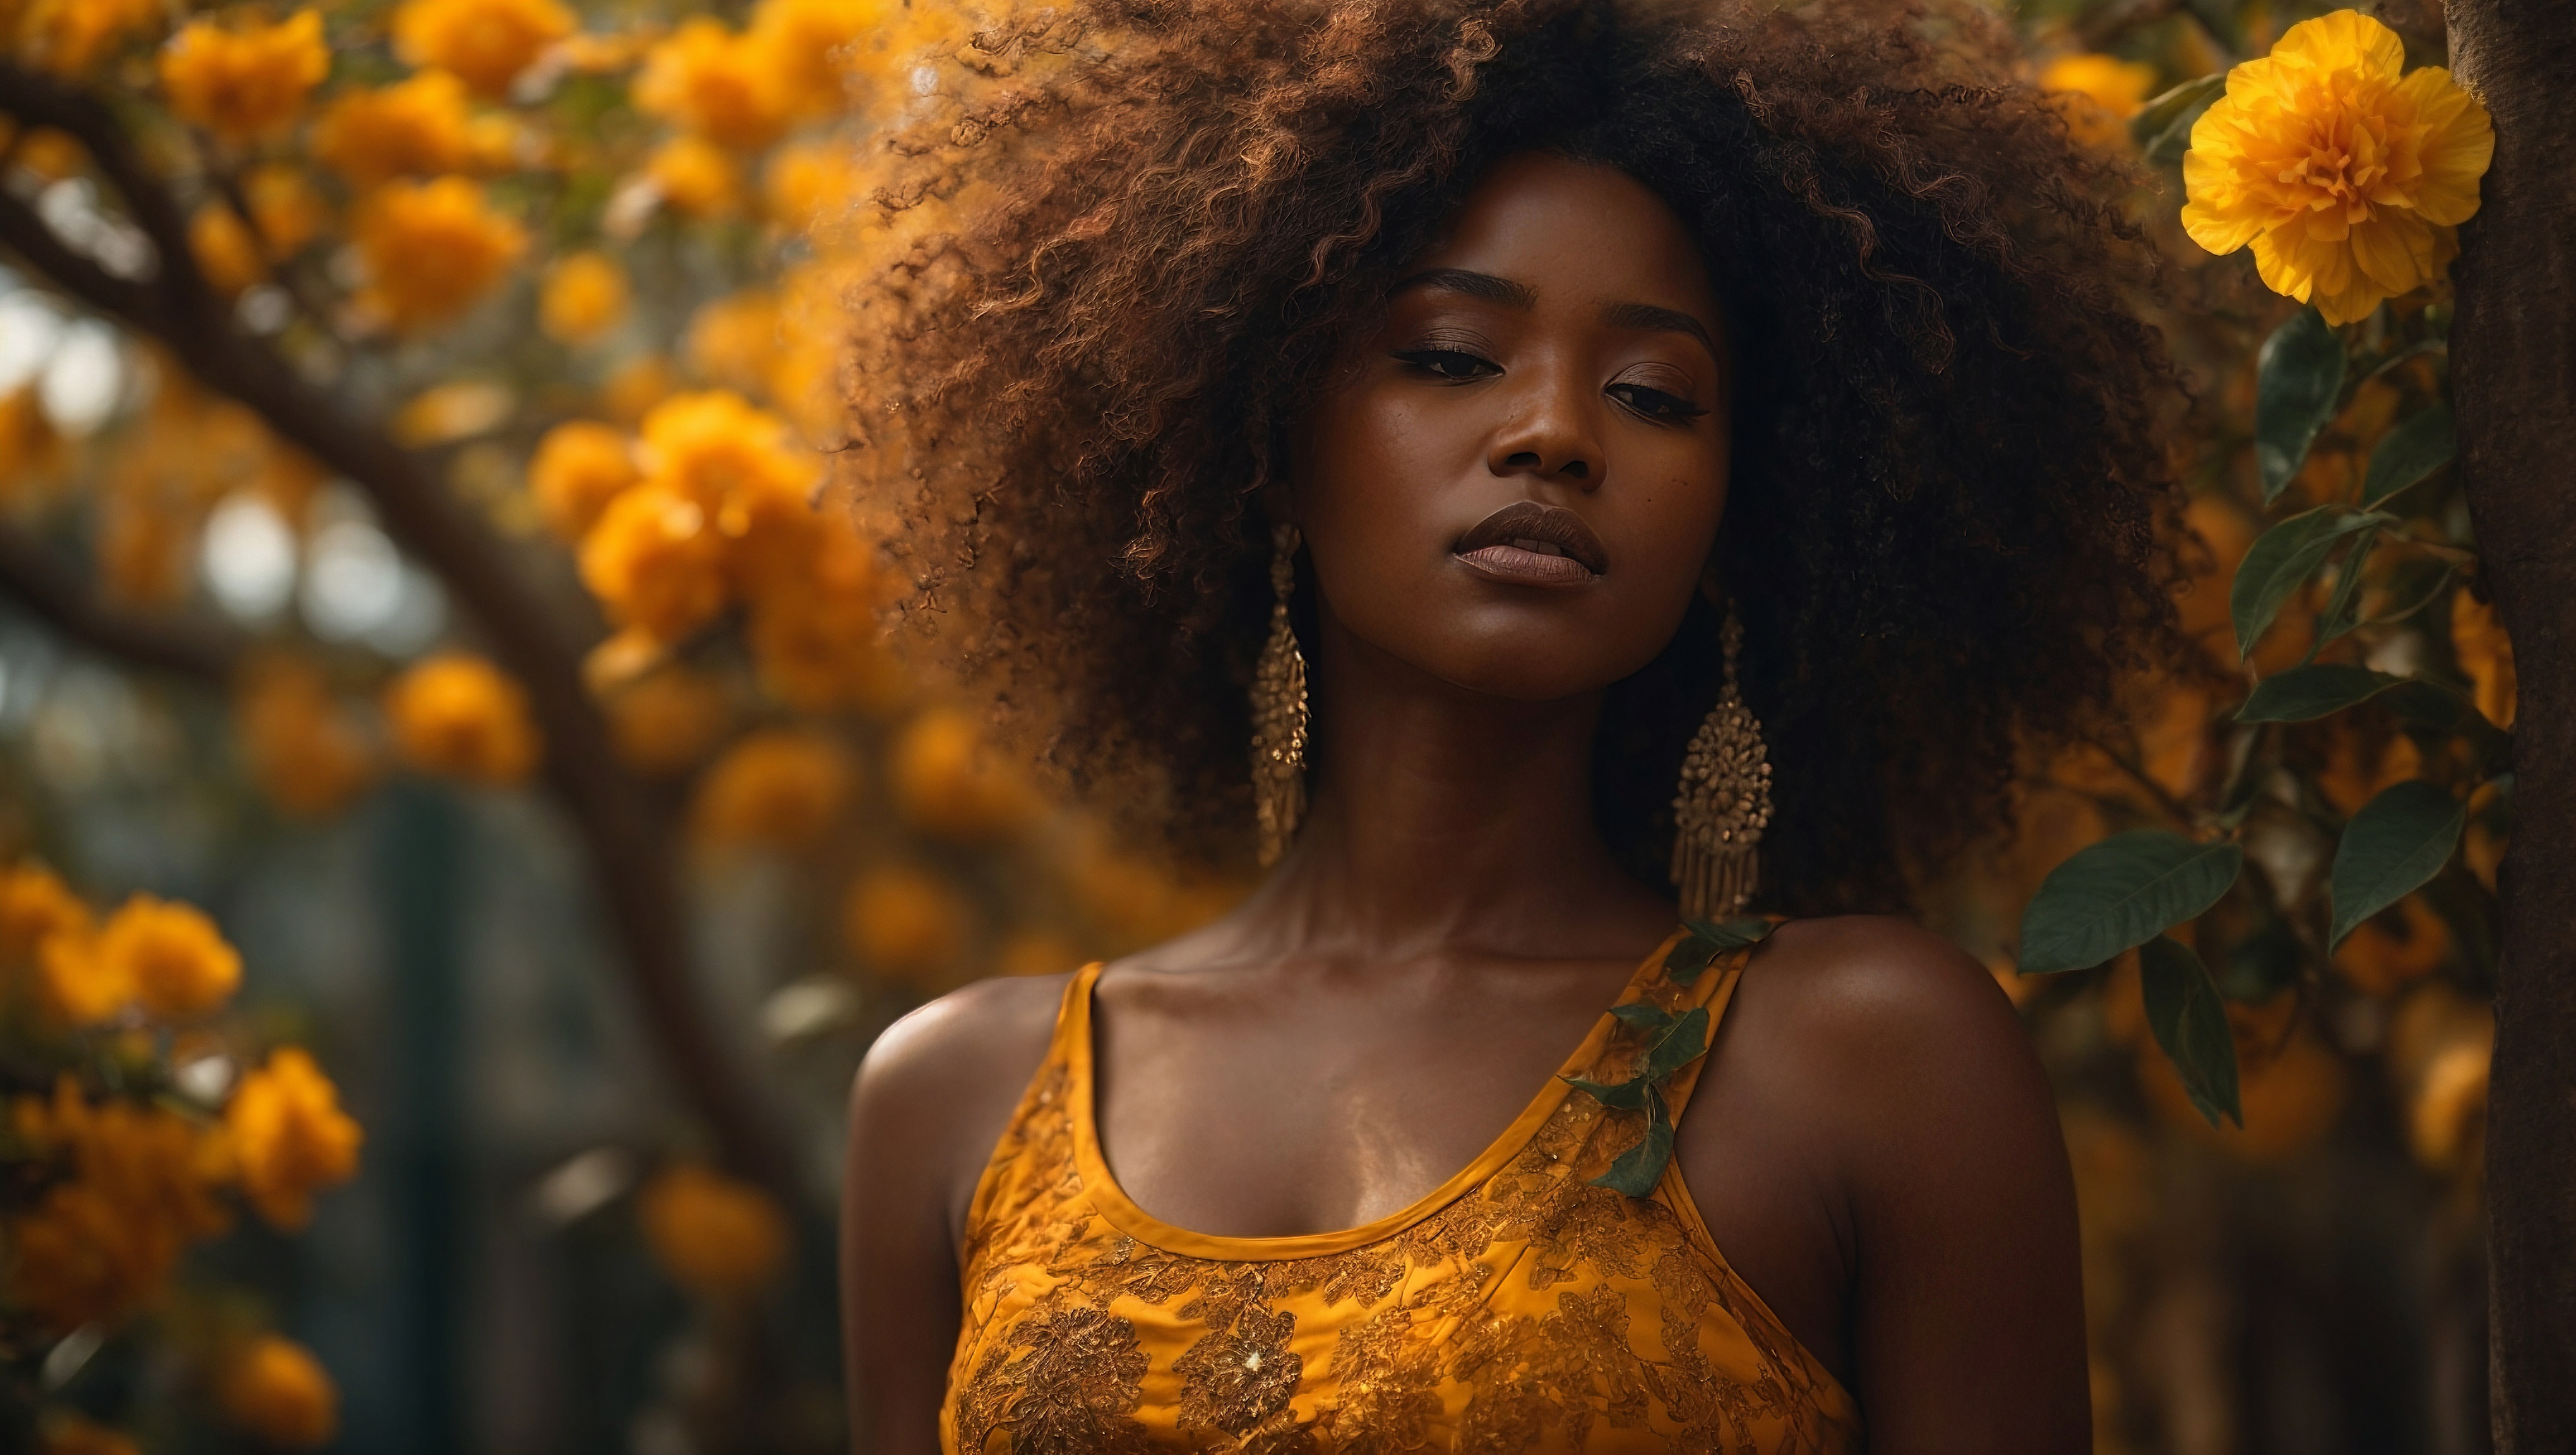 Free photo A beautiful young black woman wearing yellow clothes standing in front of flowers